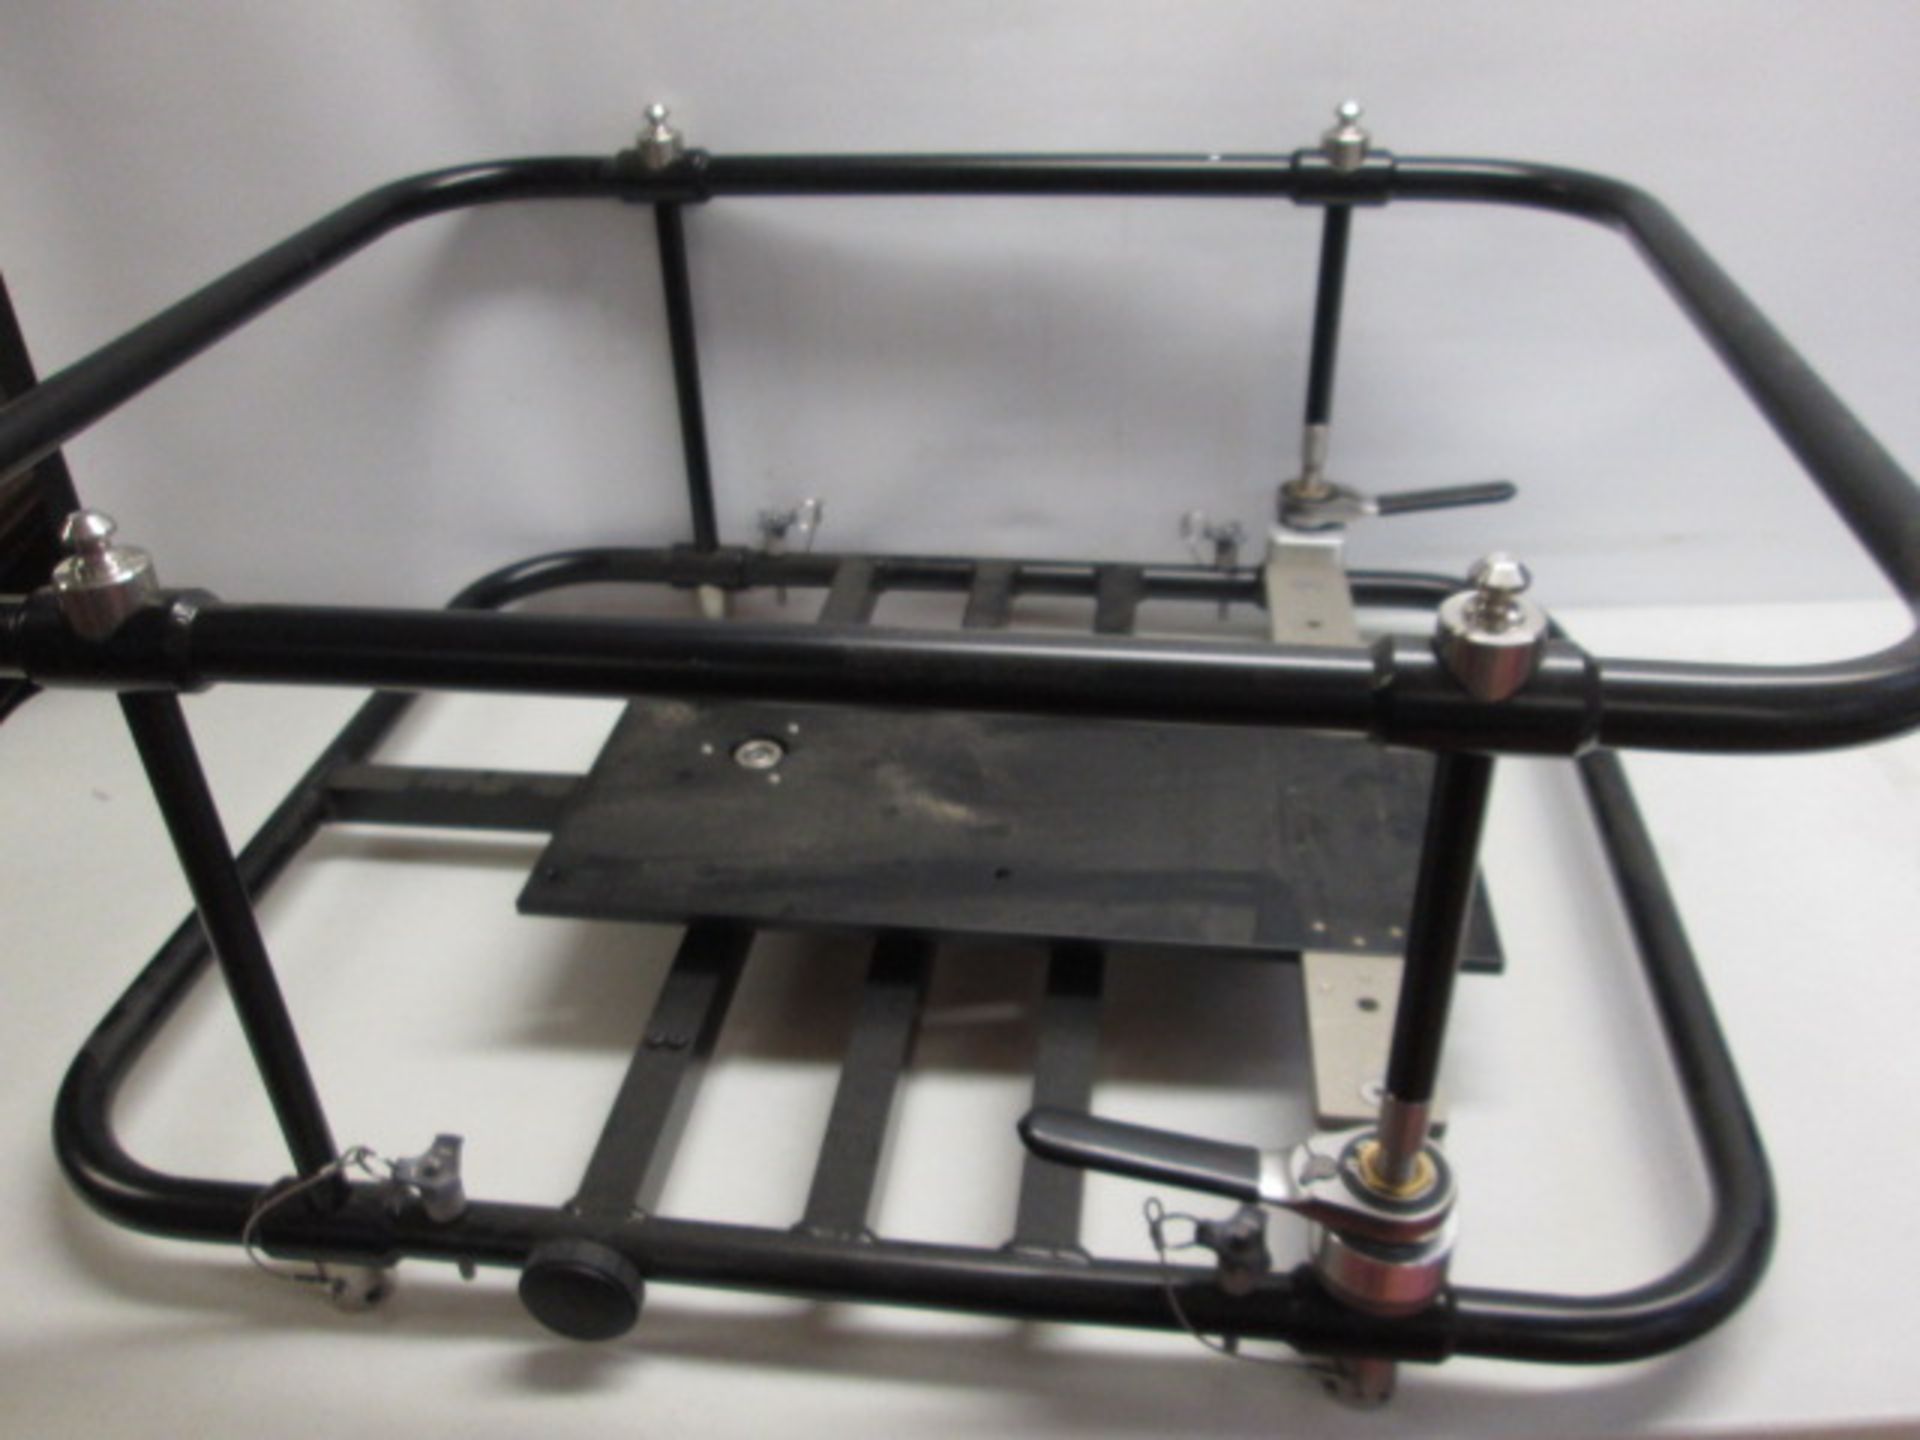 Bespoke Adjustable Projector Cradle. (Believed to be used with the Panasonic PT-DZ870).